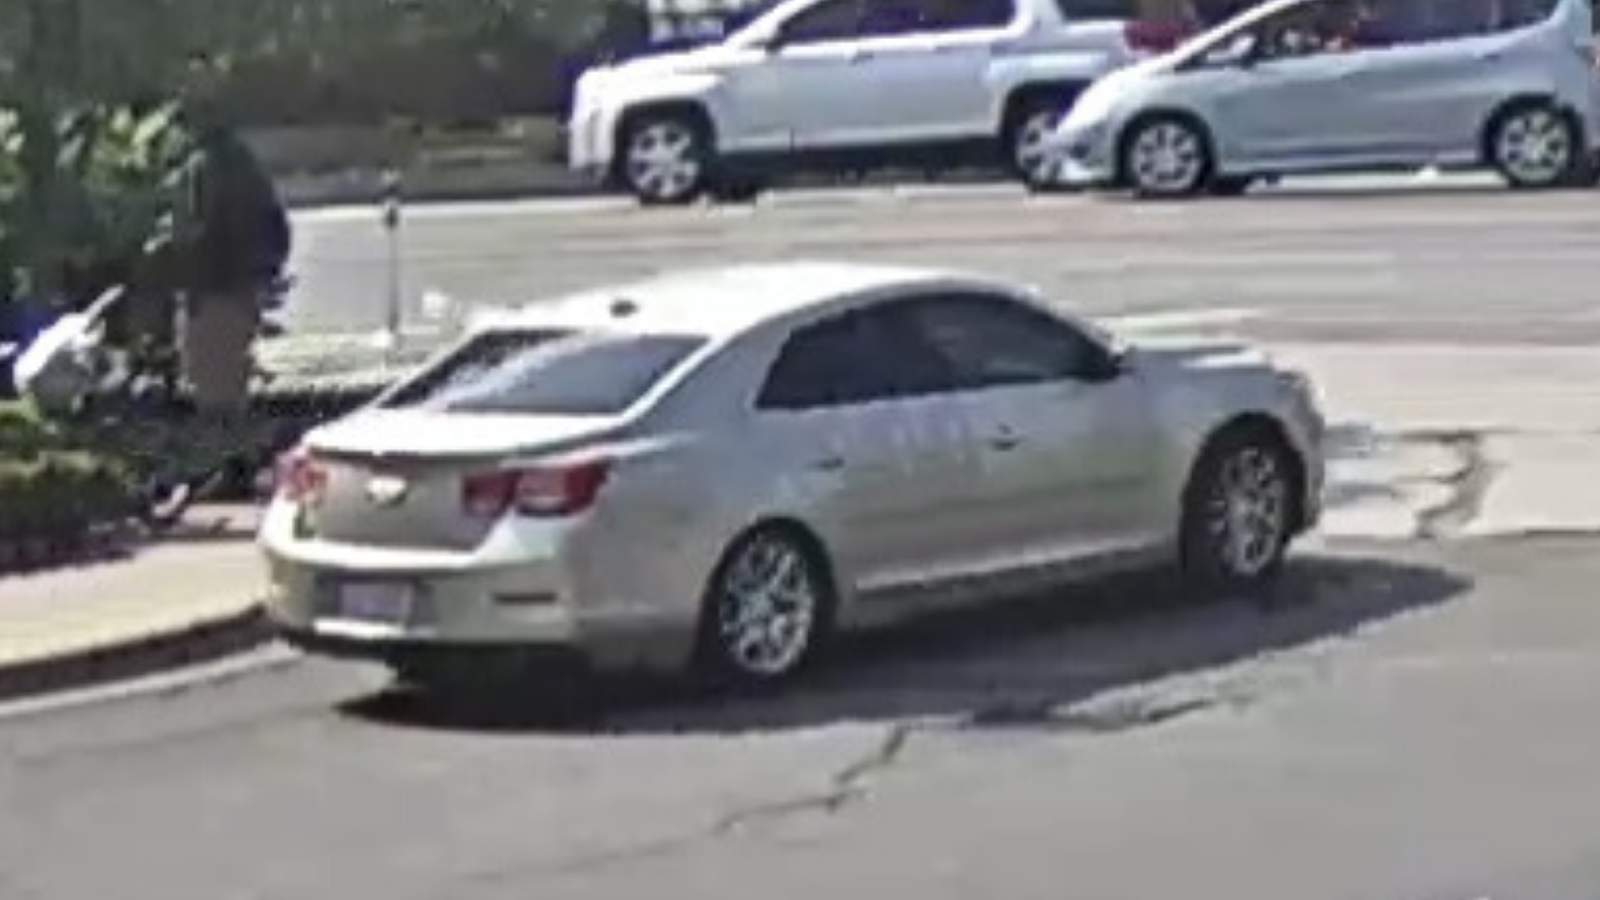 Detroit police seeking suspect who fled scene of retail fraud incident on city’s east side